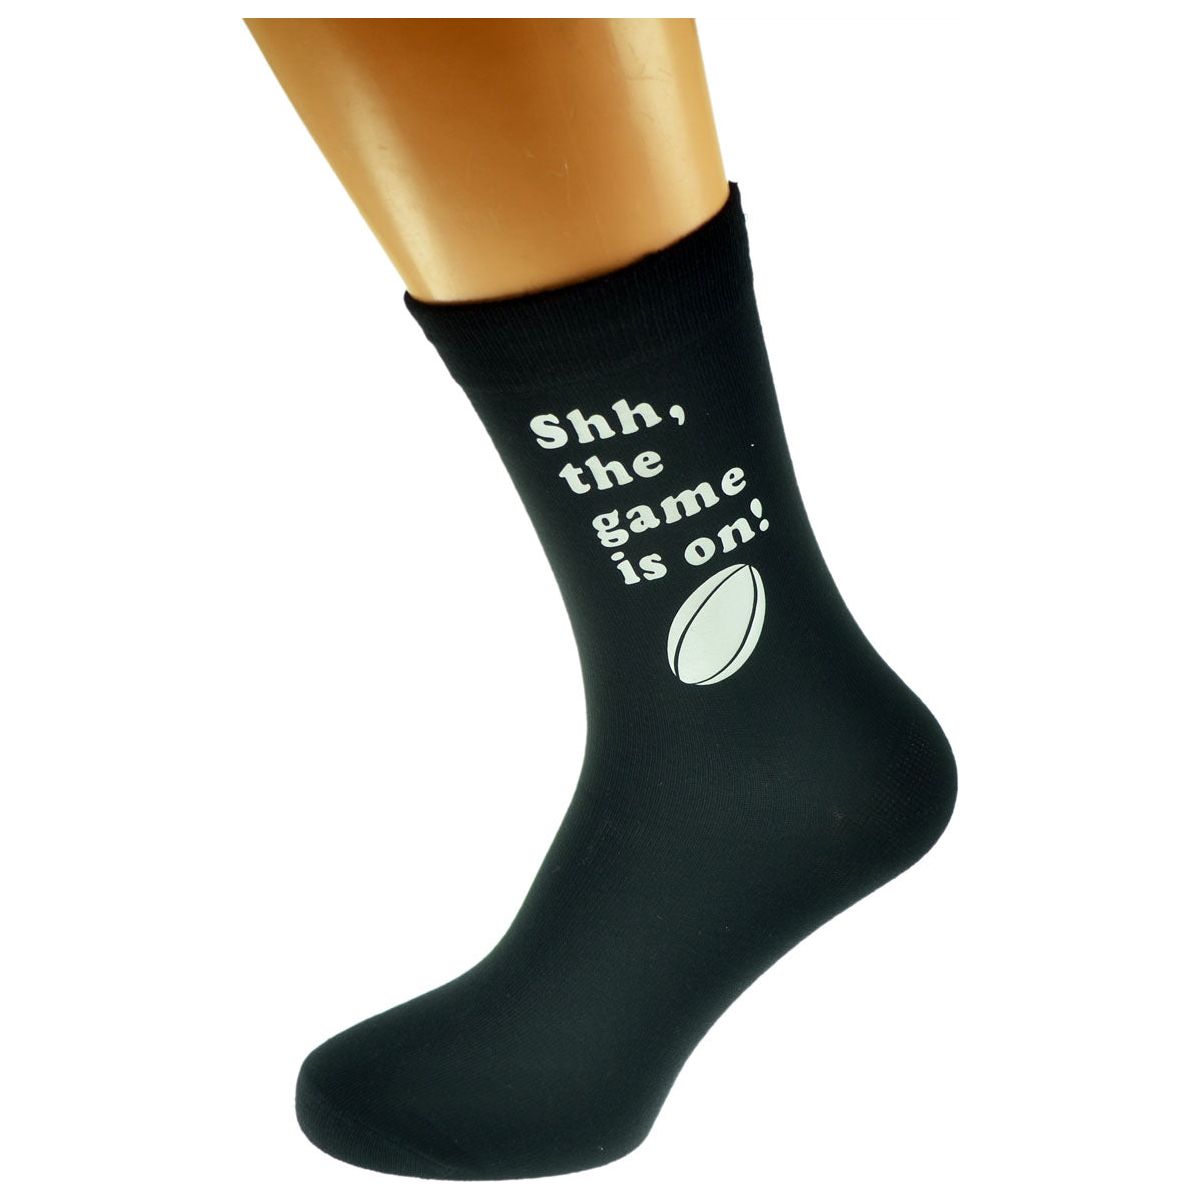 Shh the game is on Rugby Fan Mens Black Socks - Ashton and Finch